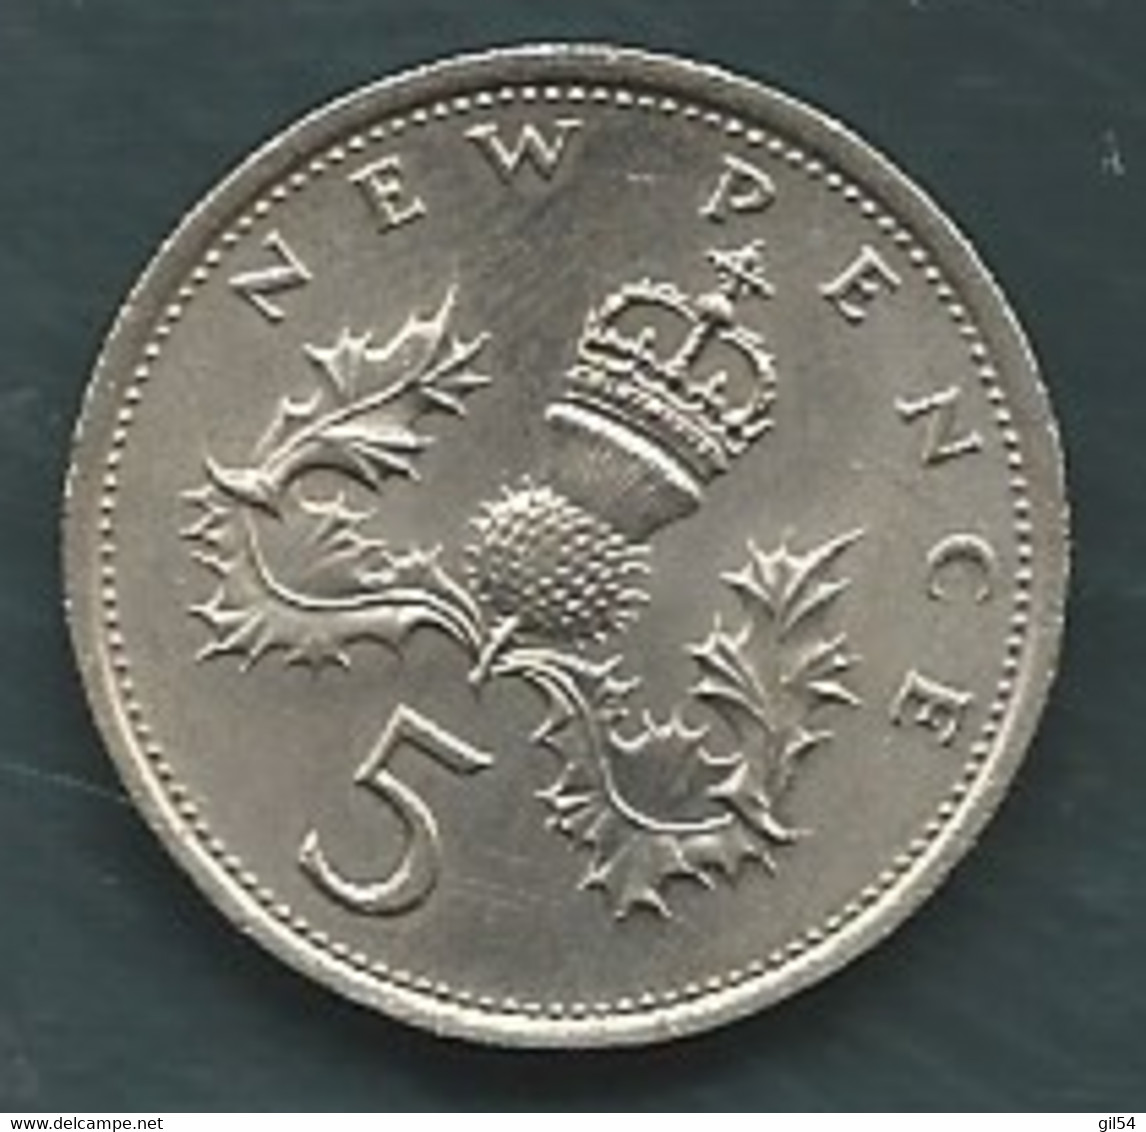 Coin , Pièce Great Britain 5 Pence 1975 Pic 7603 - 5 Pence & 5 New Pence